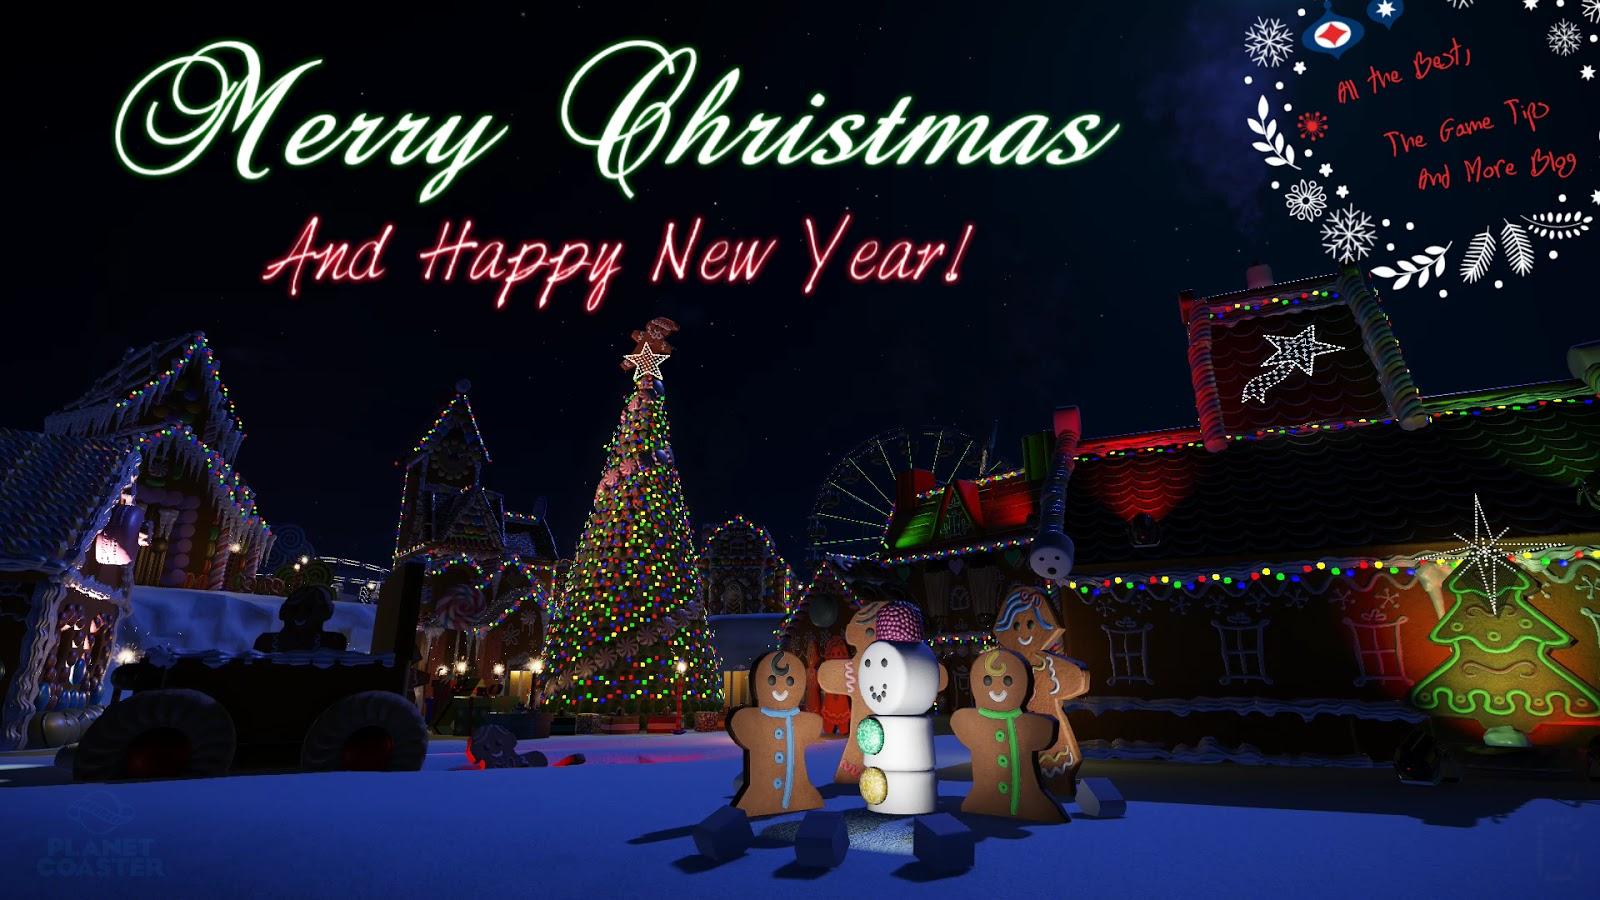 The Game Tips And More Blog: Merry Christmas Happy New